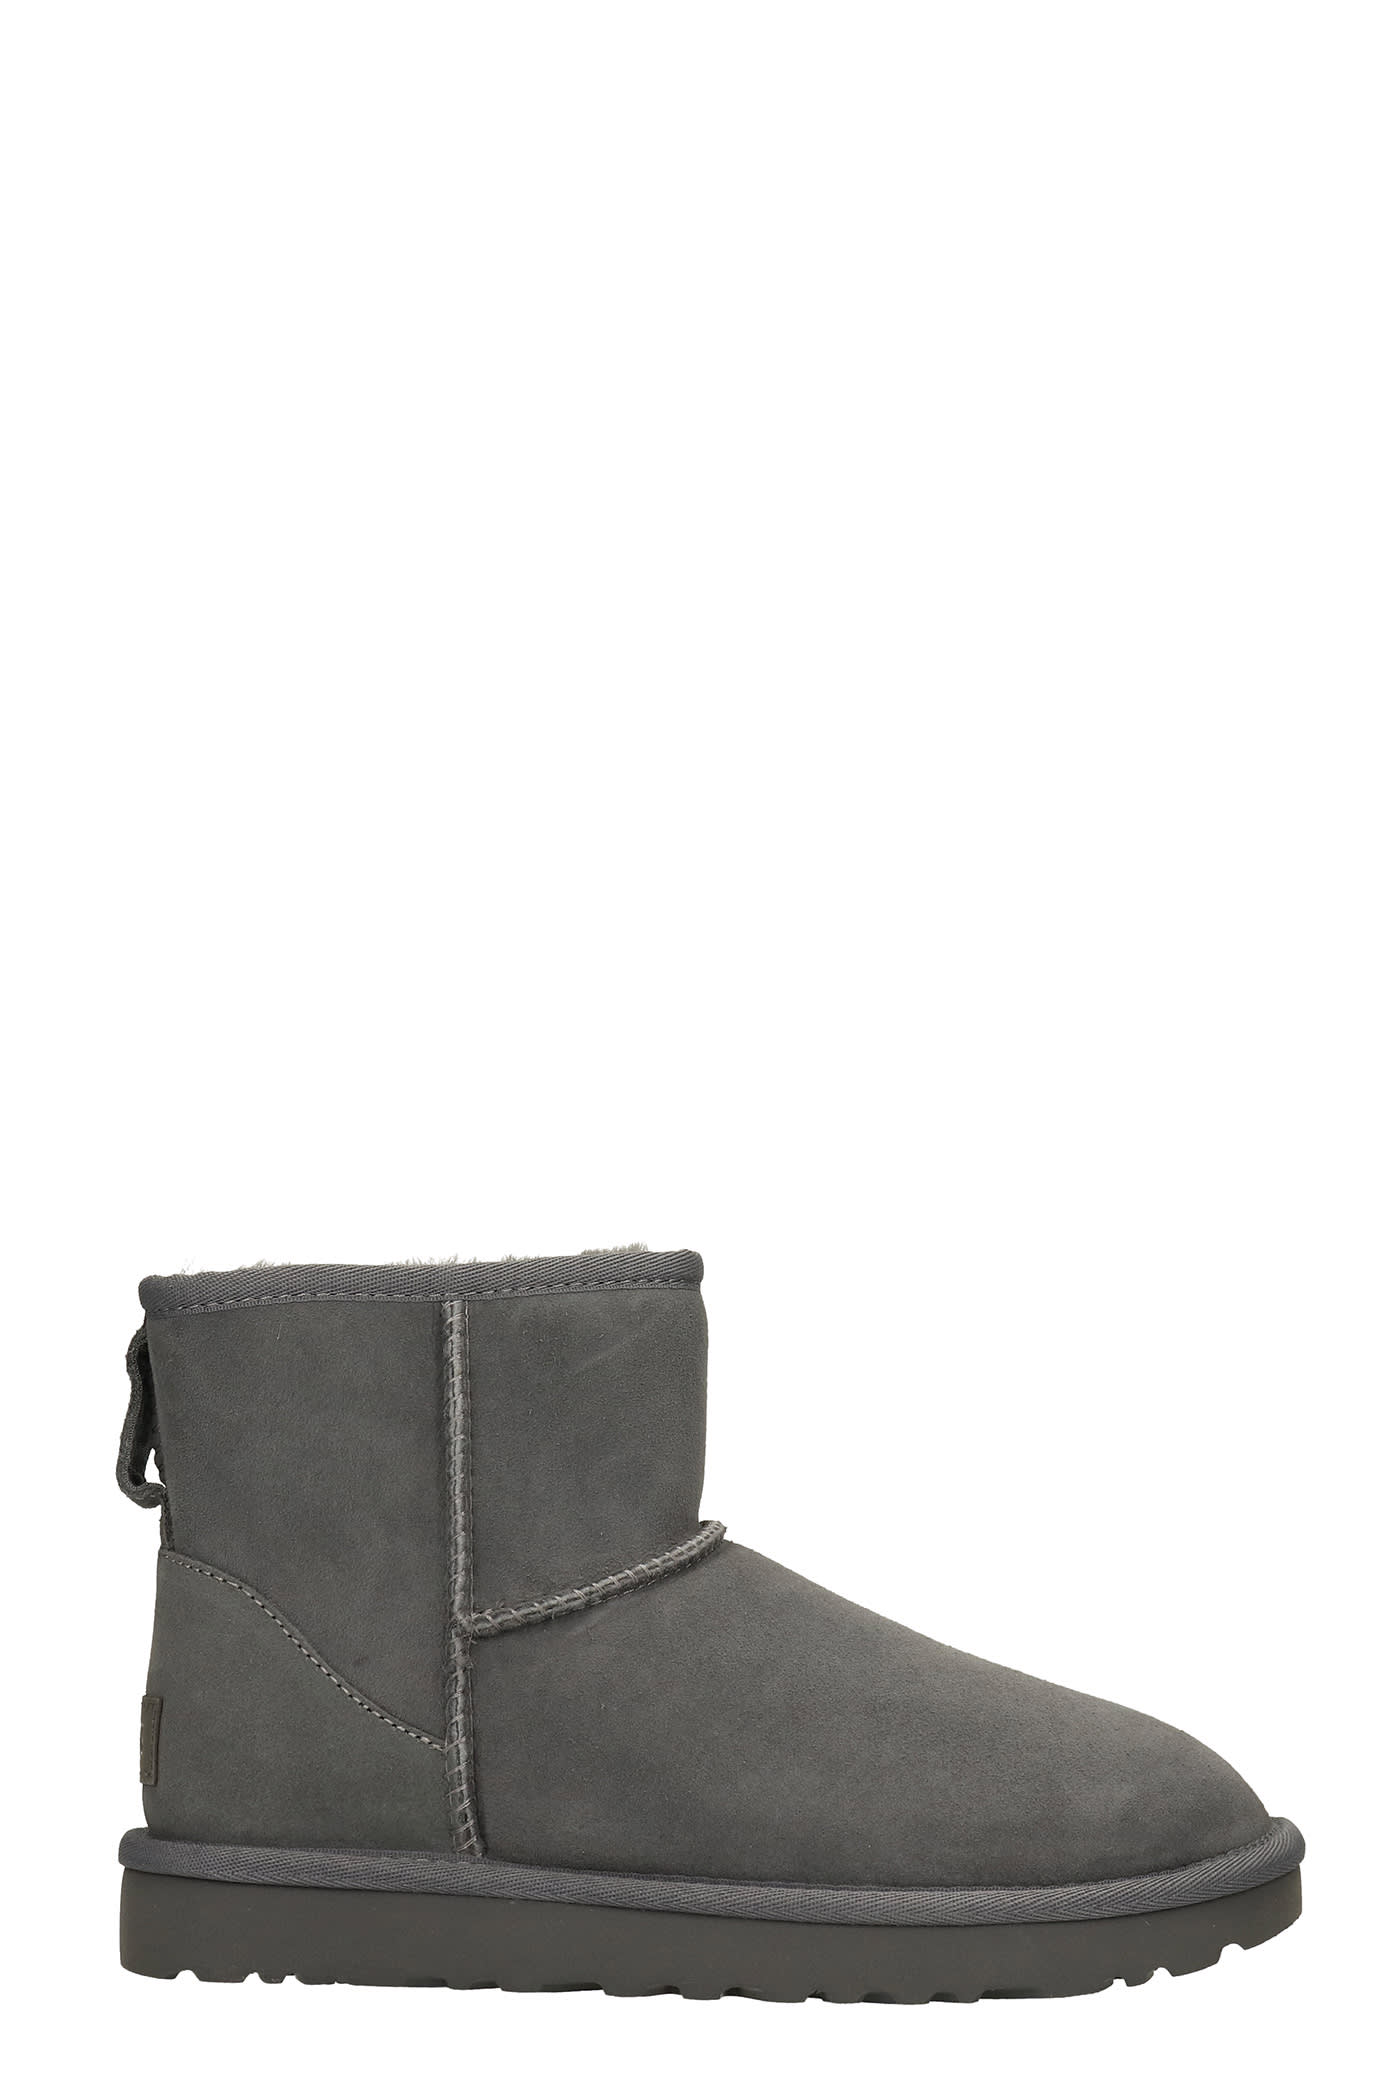 UGG Mini Classic Ii Low Heels Ankle Boots In Grey Suede